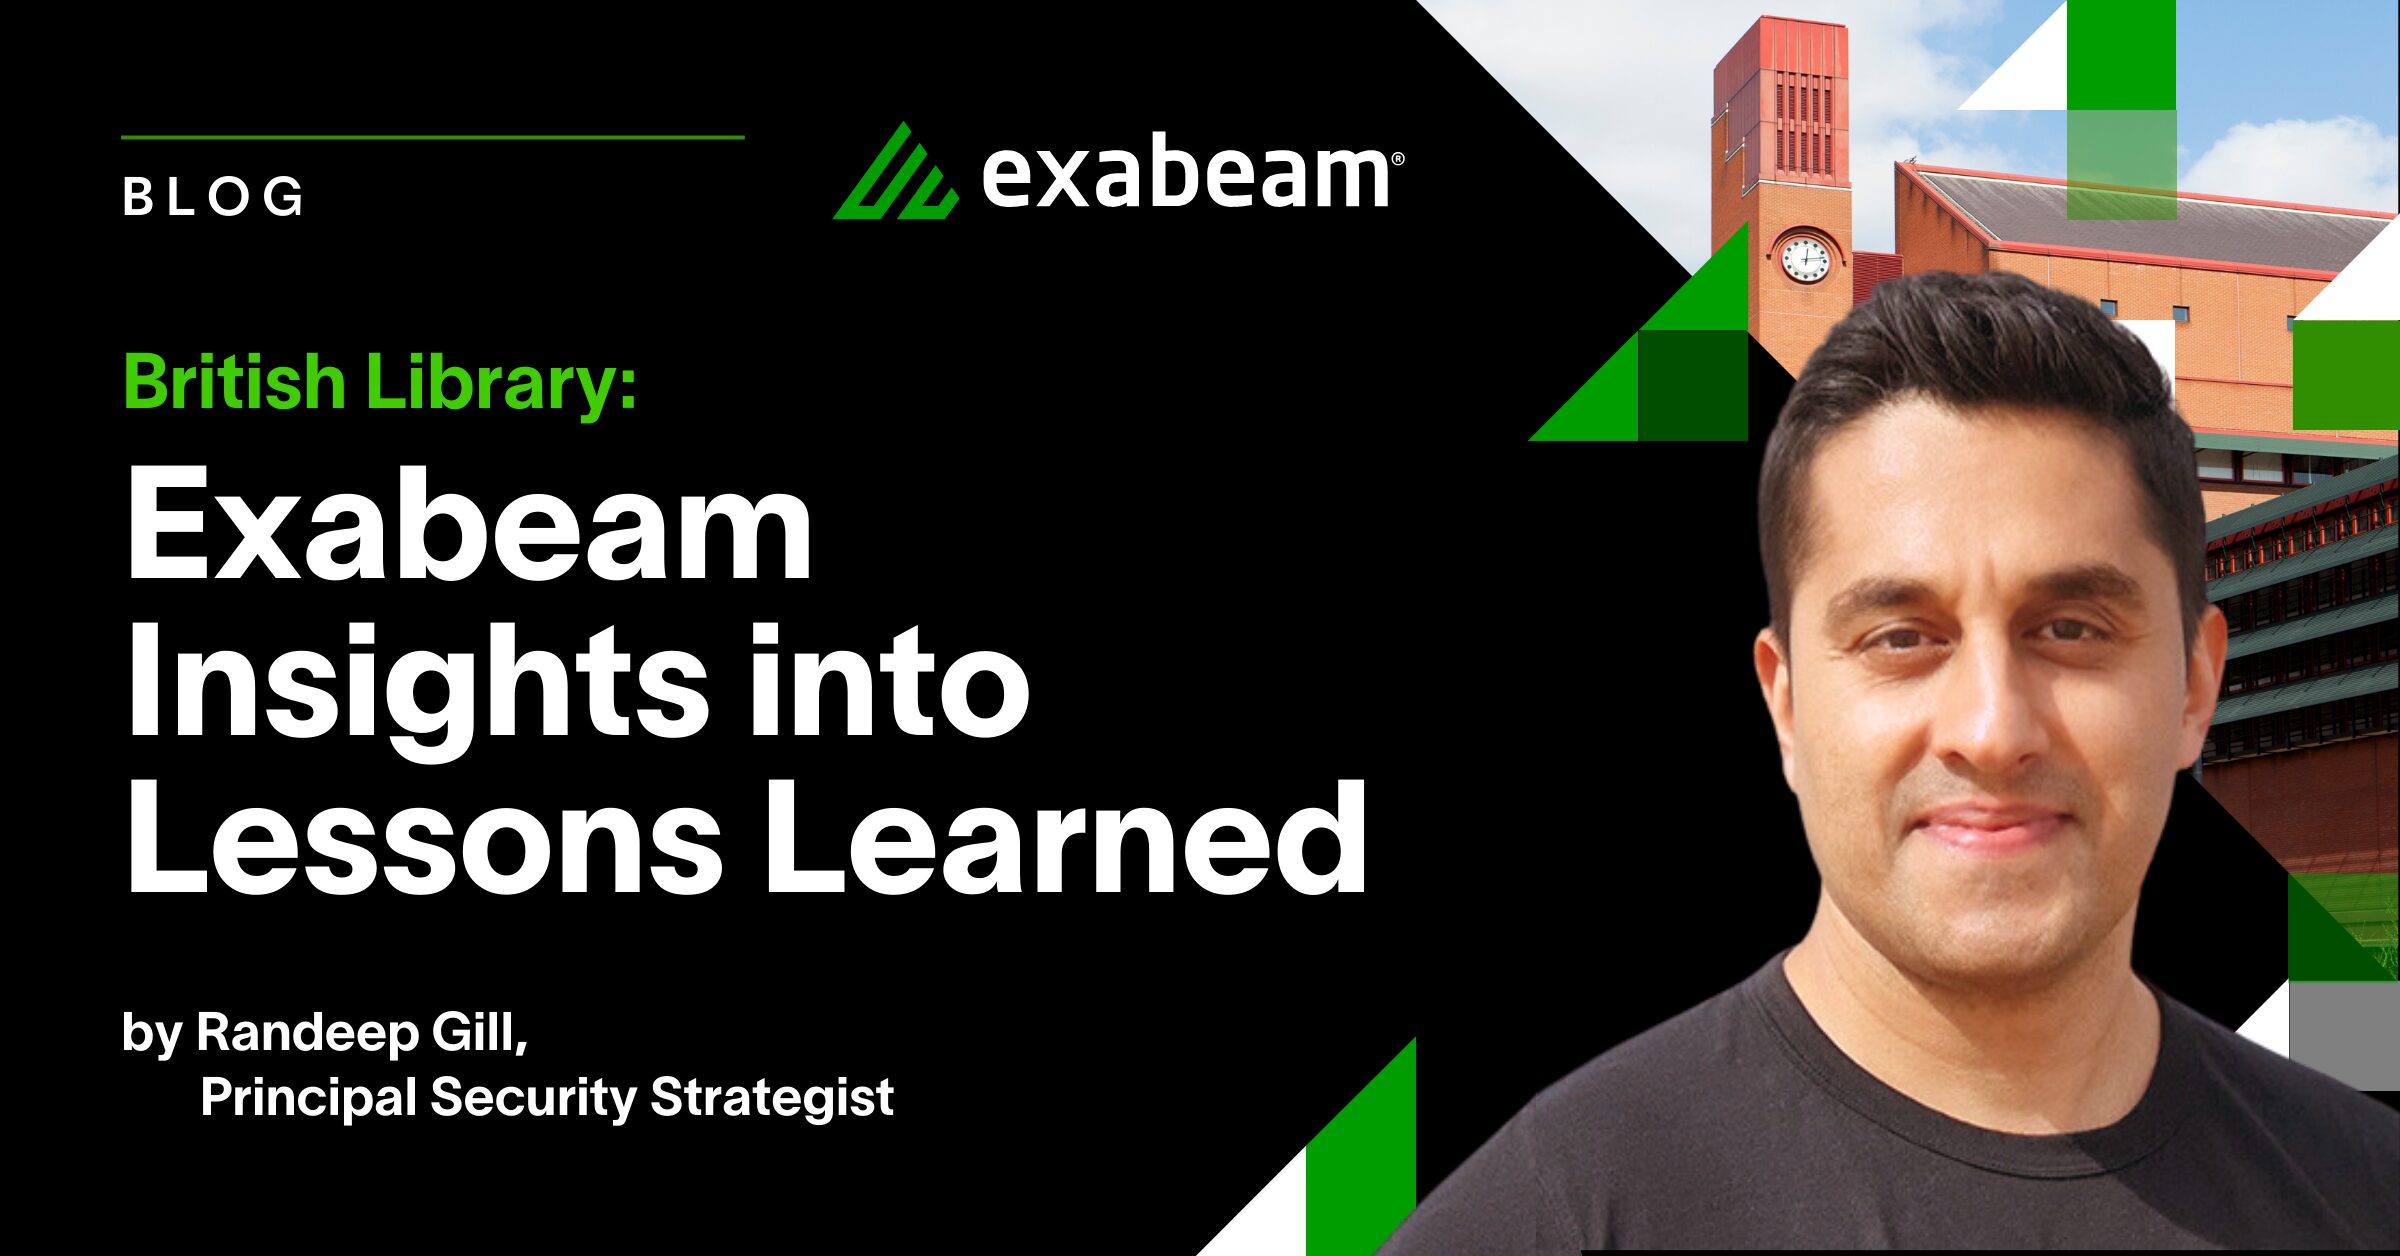 British Library: Exabeam Insights into Lessons Learned